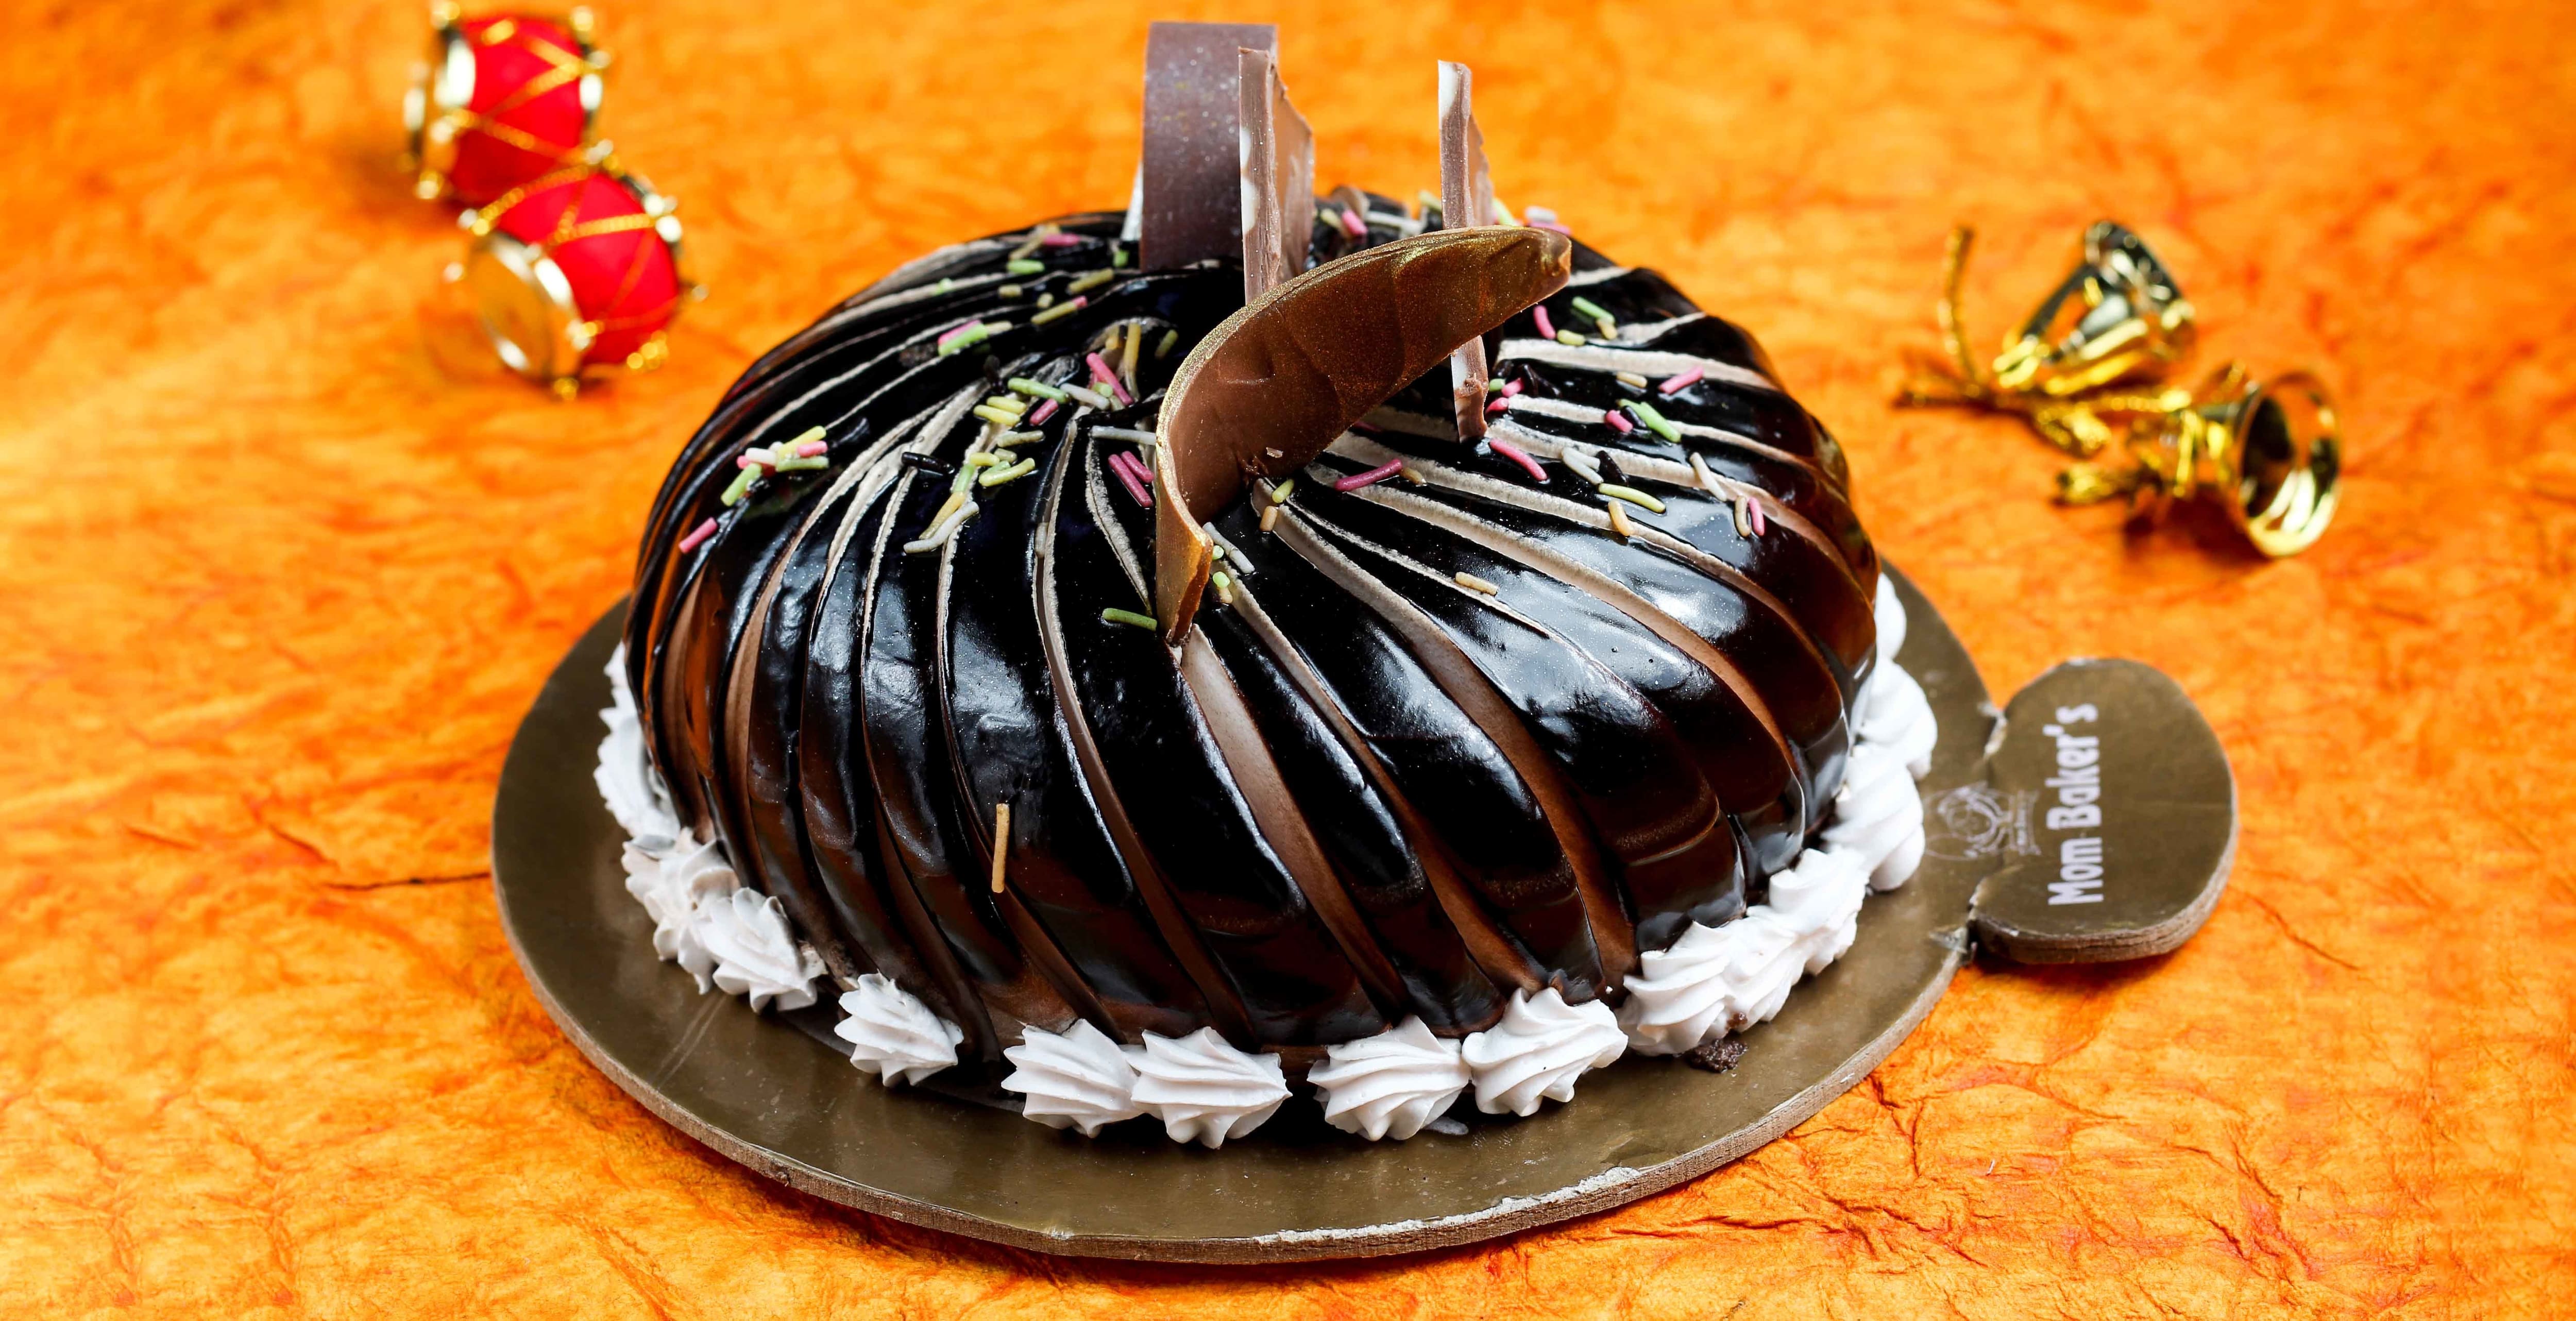 Send Mother's Day Cakes Online - Mohali Bakers